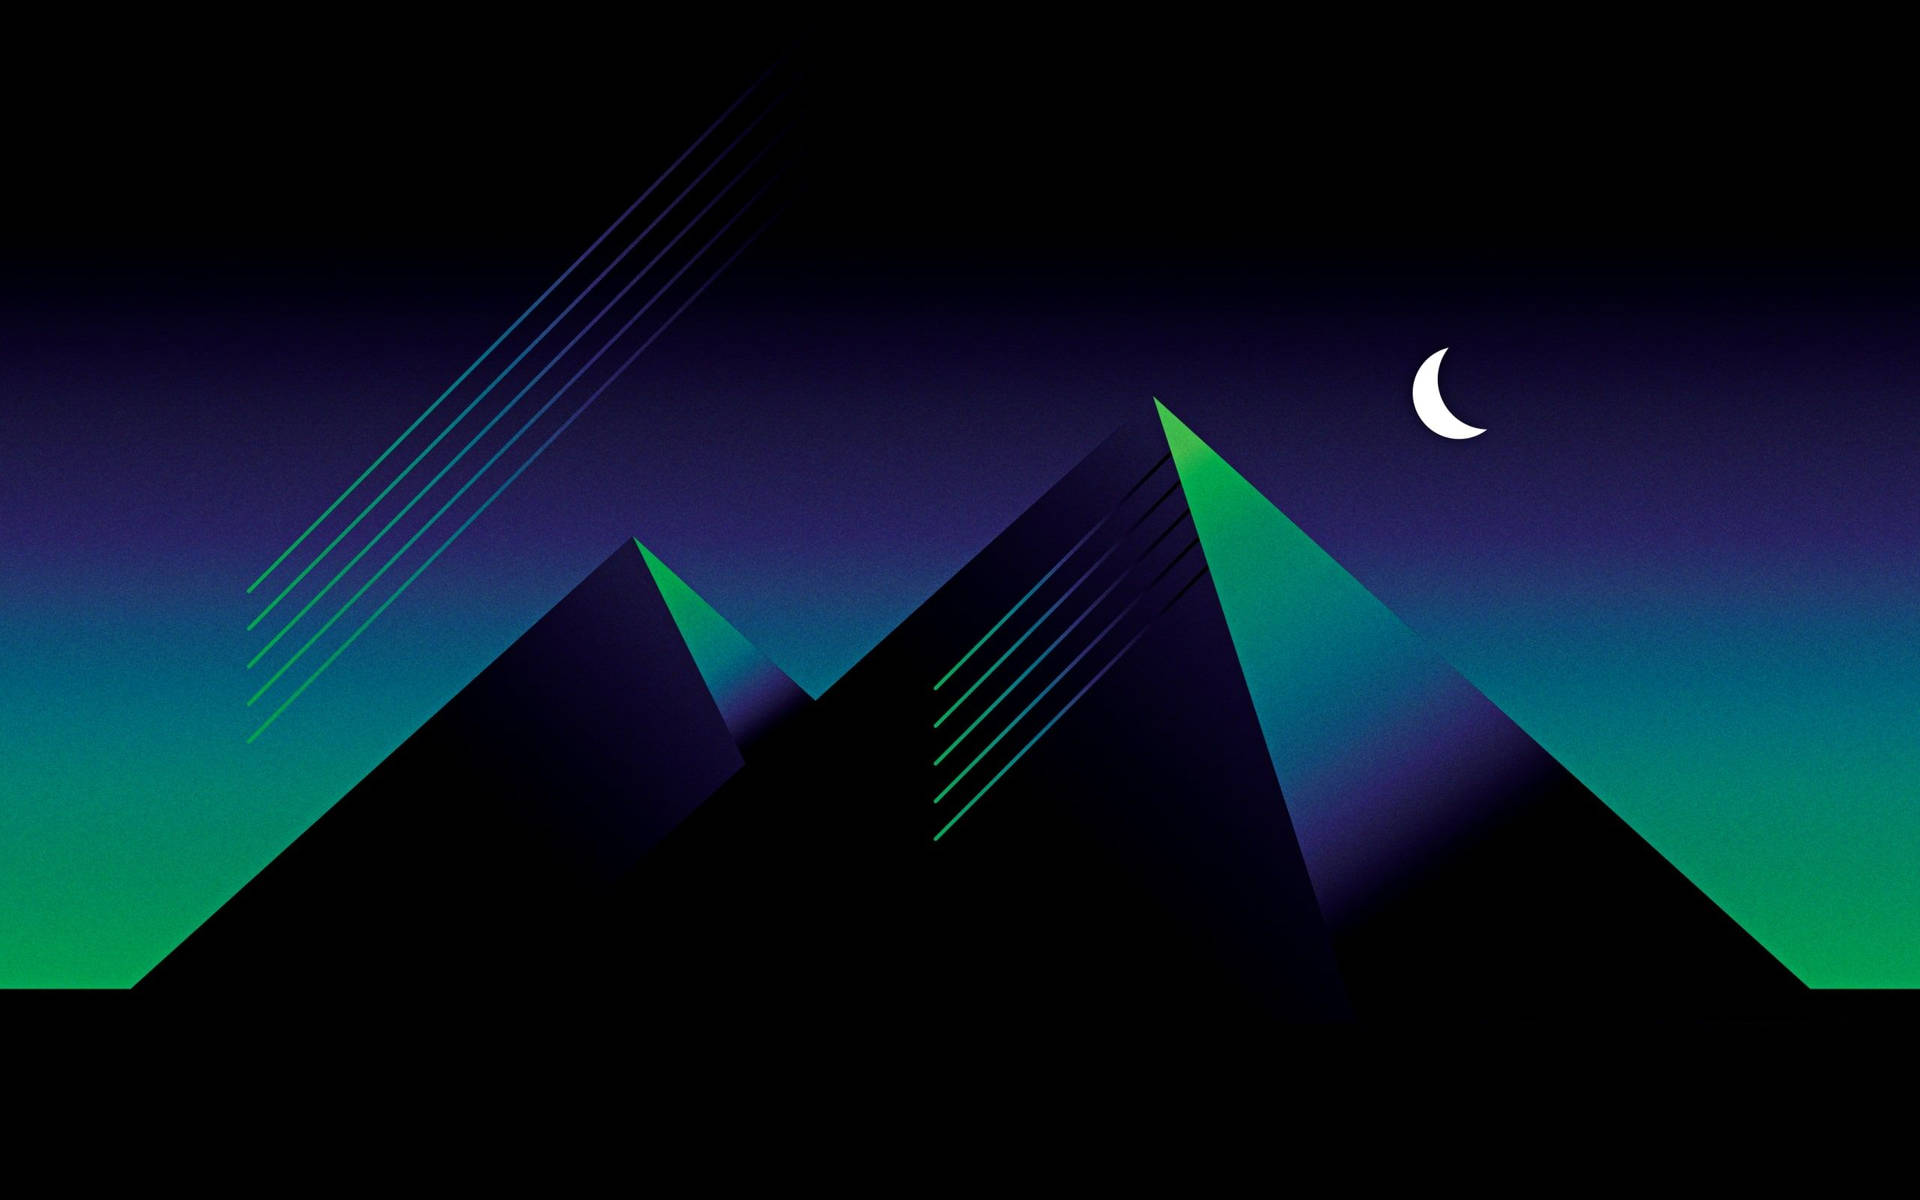 Black Pyramid Amidst Green And Purple Hues Background